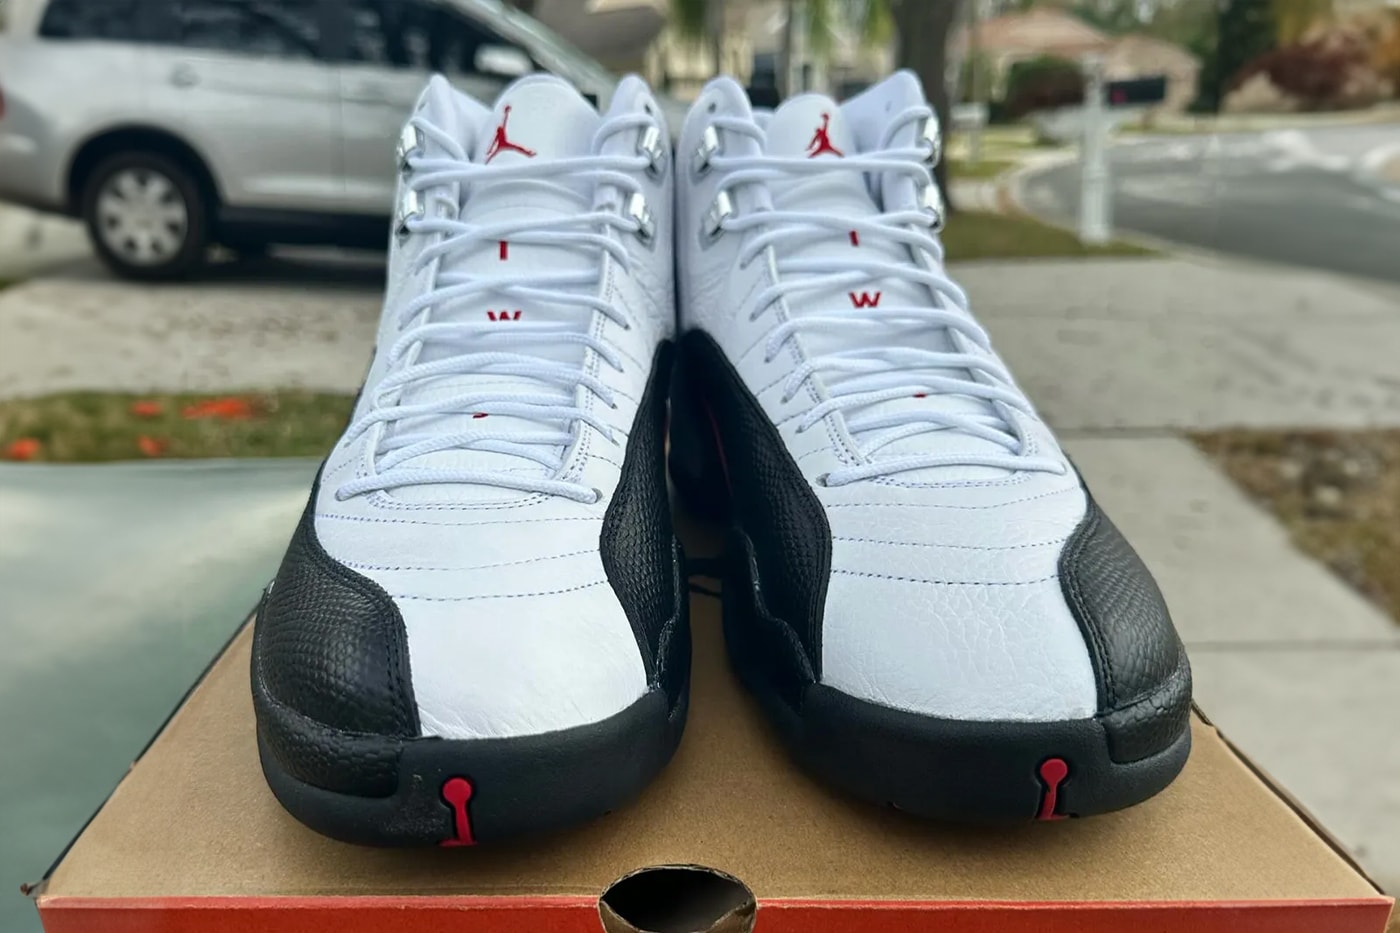 Air Jordan 12 "Red Taxi" Has Surfaced and Has a Confirmed Spring 2024 Release Date CT8013-162 jordan brand may michael jordan retro shoe high top basketball leather